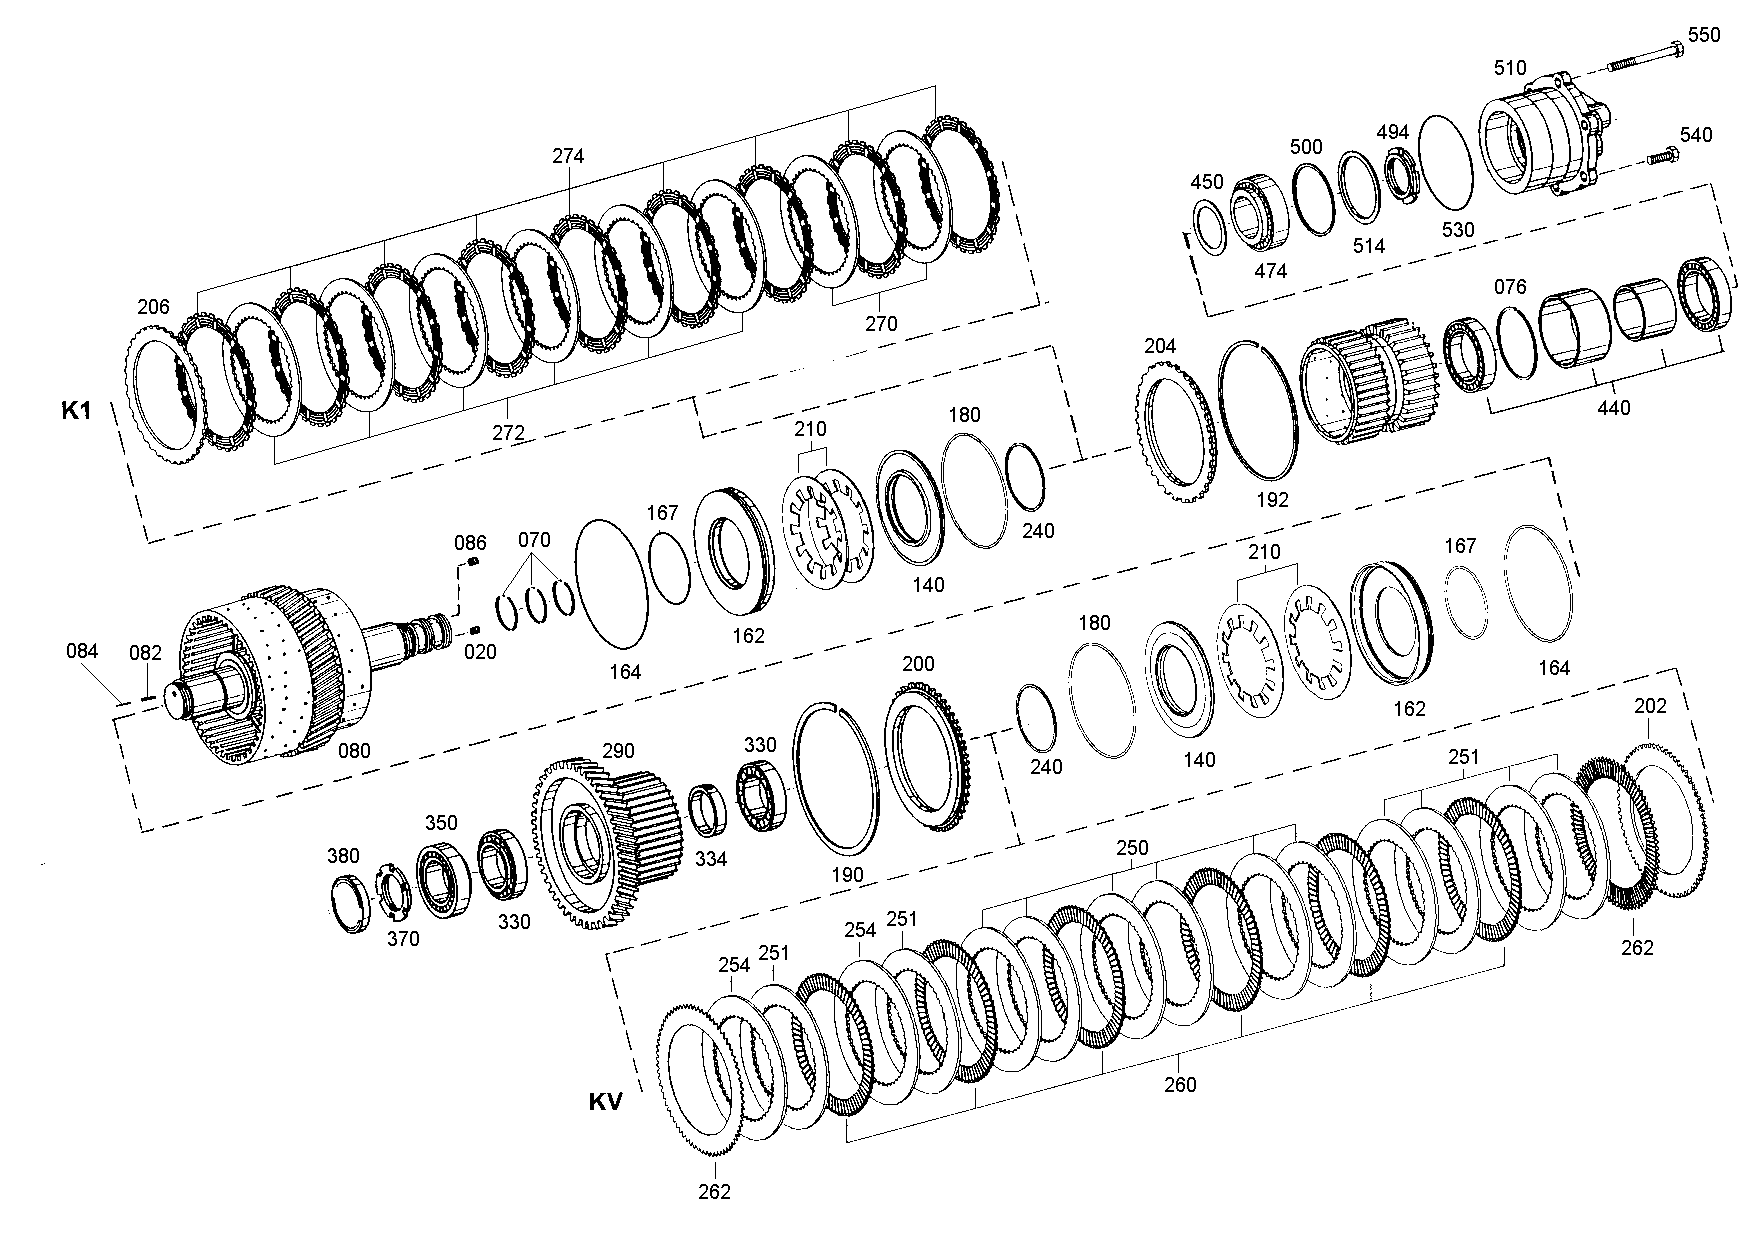 drawing for MOXY TRUCKS AS 504842 - CUP SPRING (figure 3)